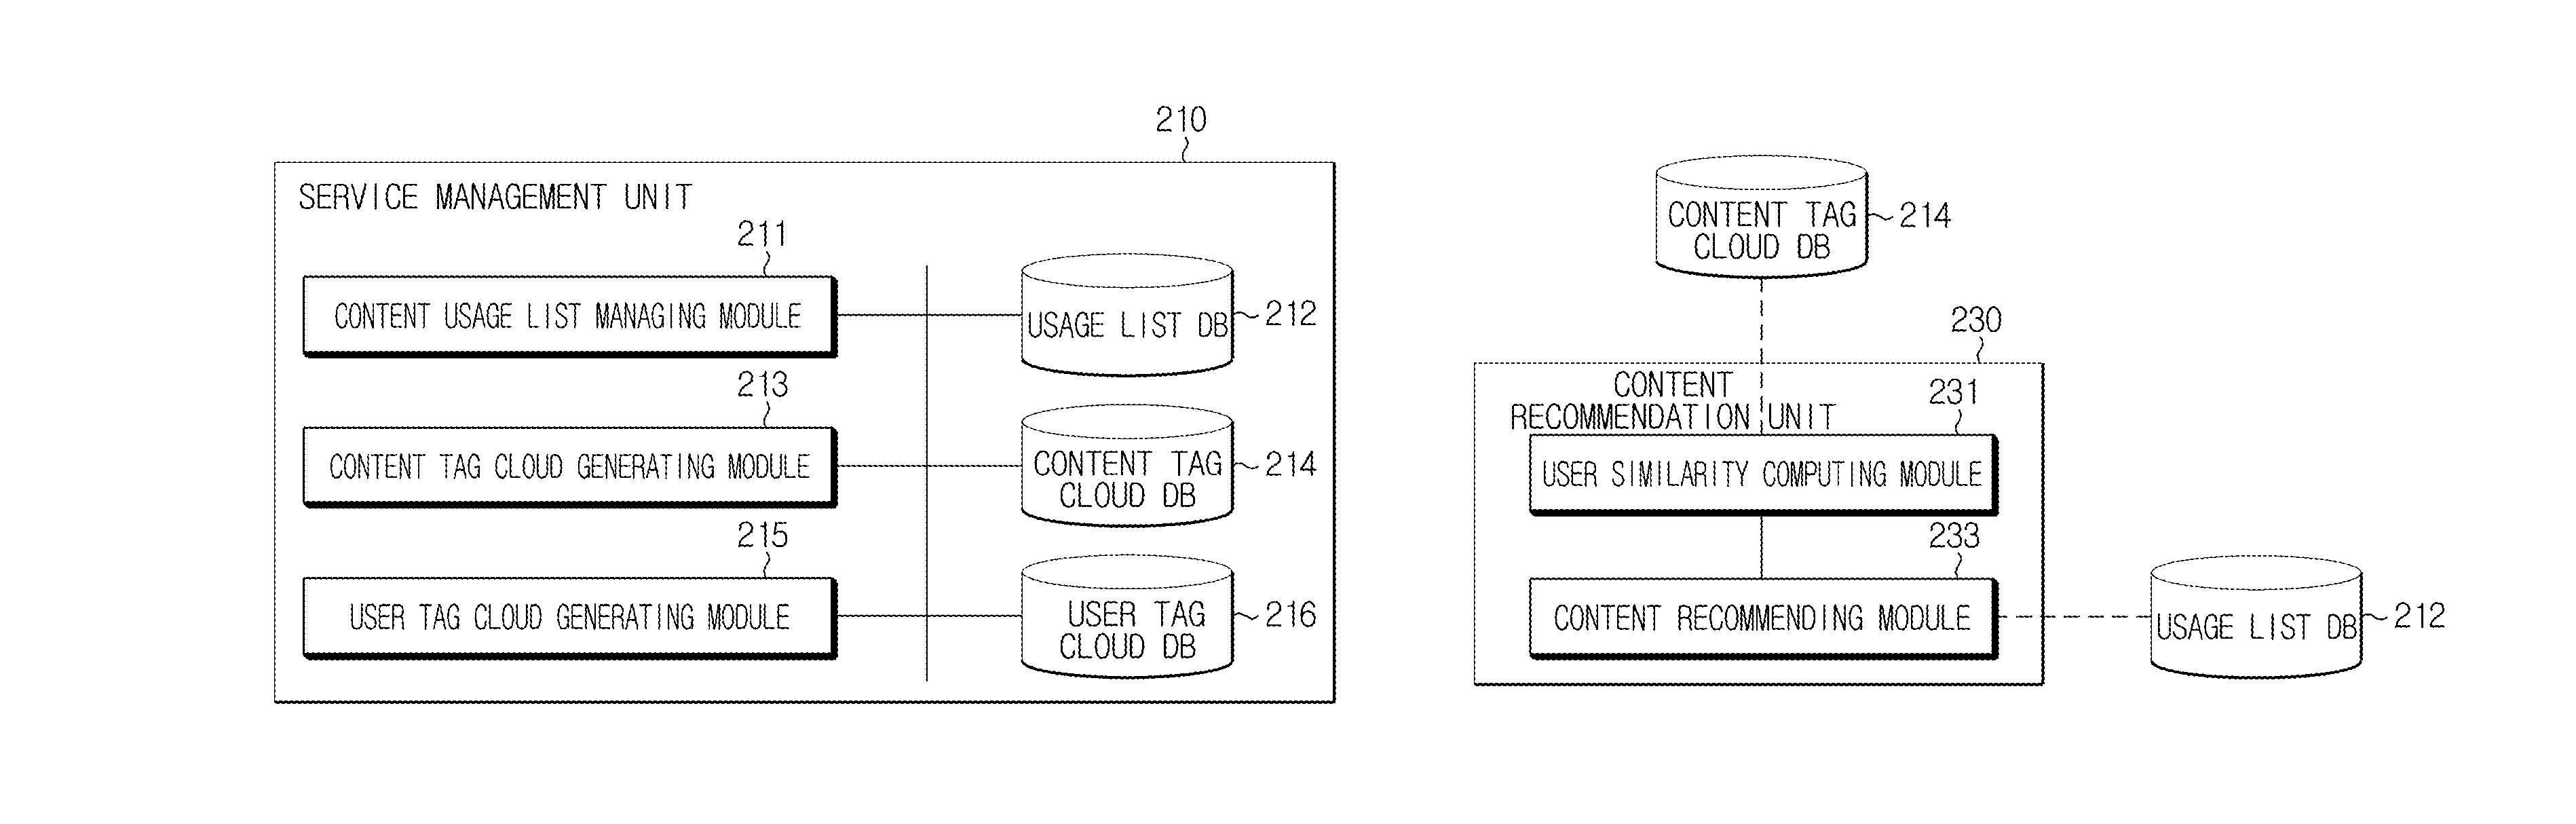 Content recommendation apparatus and method using tag cloud